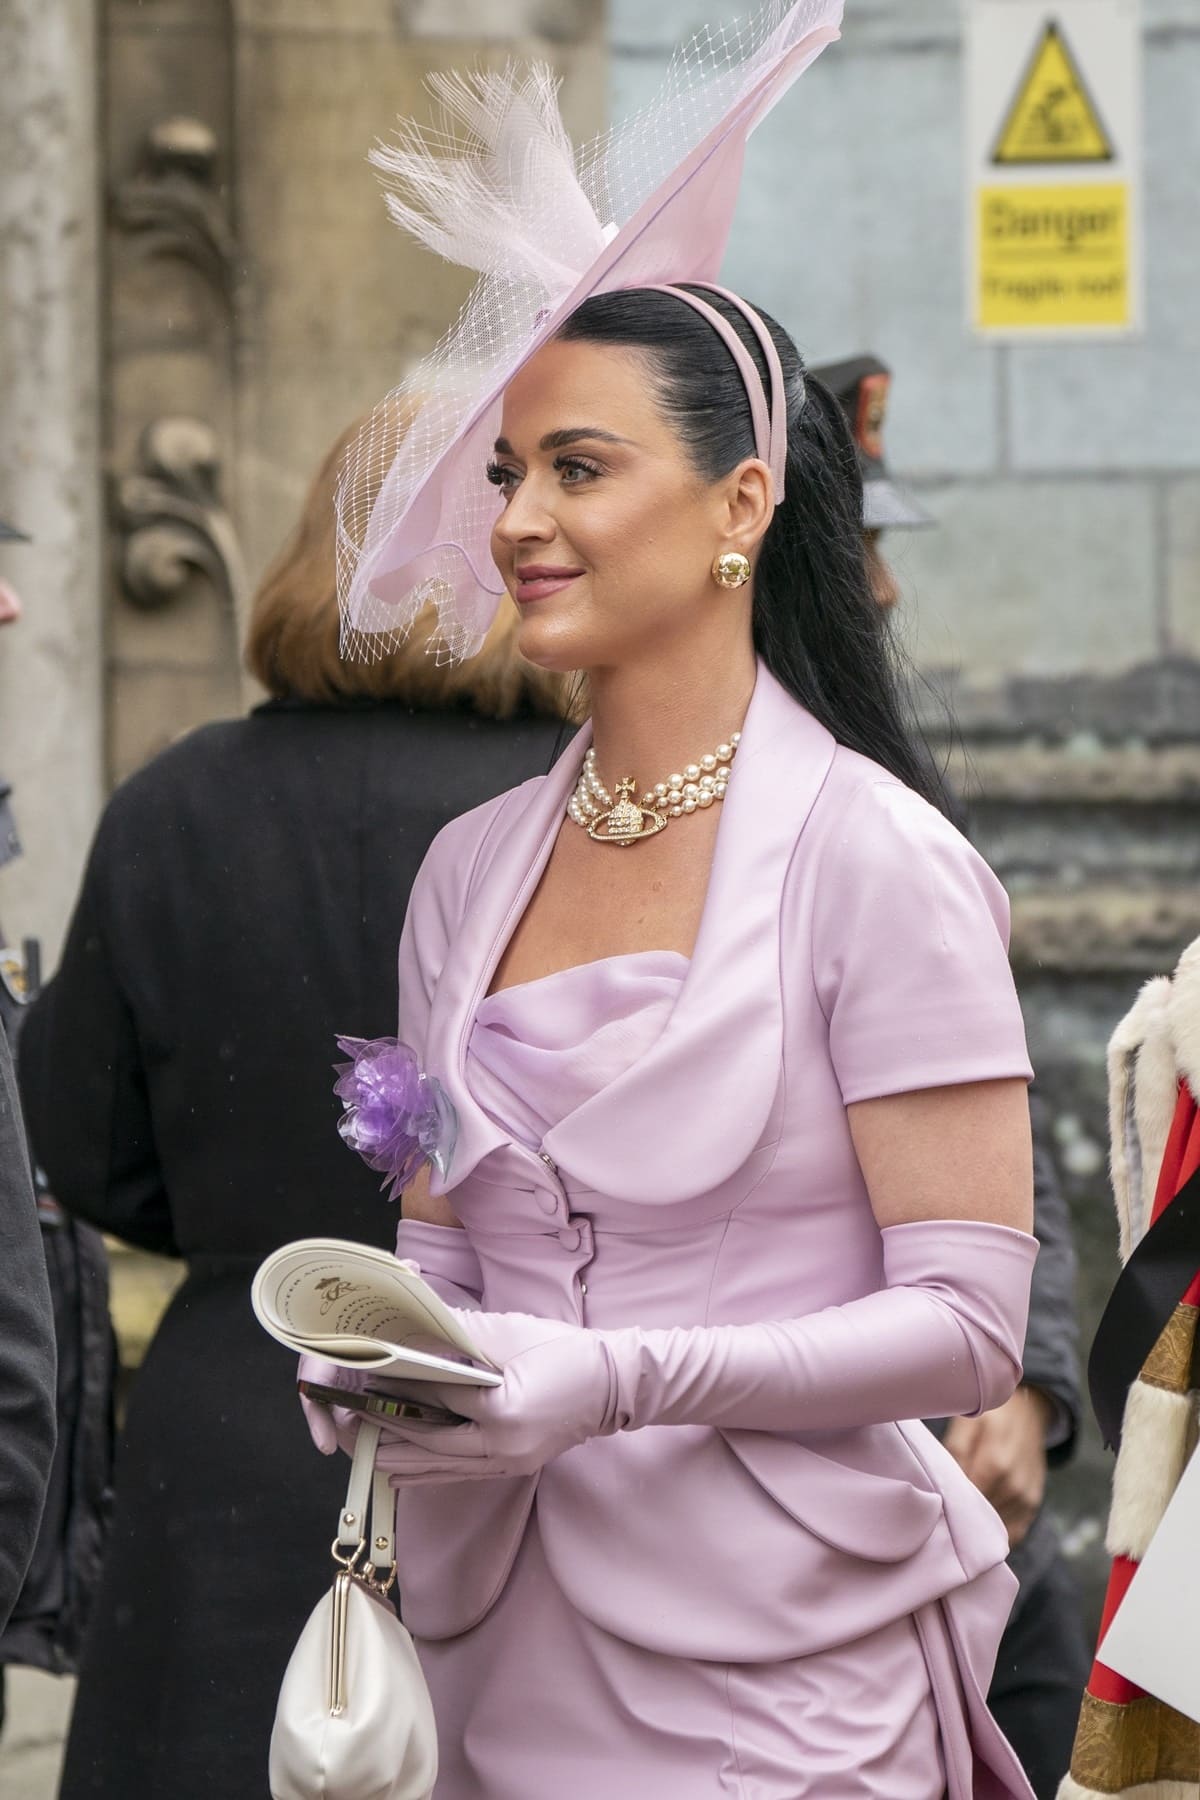 Katy Perry was dressed in a lovely lilac ensemble designed by Vivienne Westwood, along with a matching hat and gloves